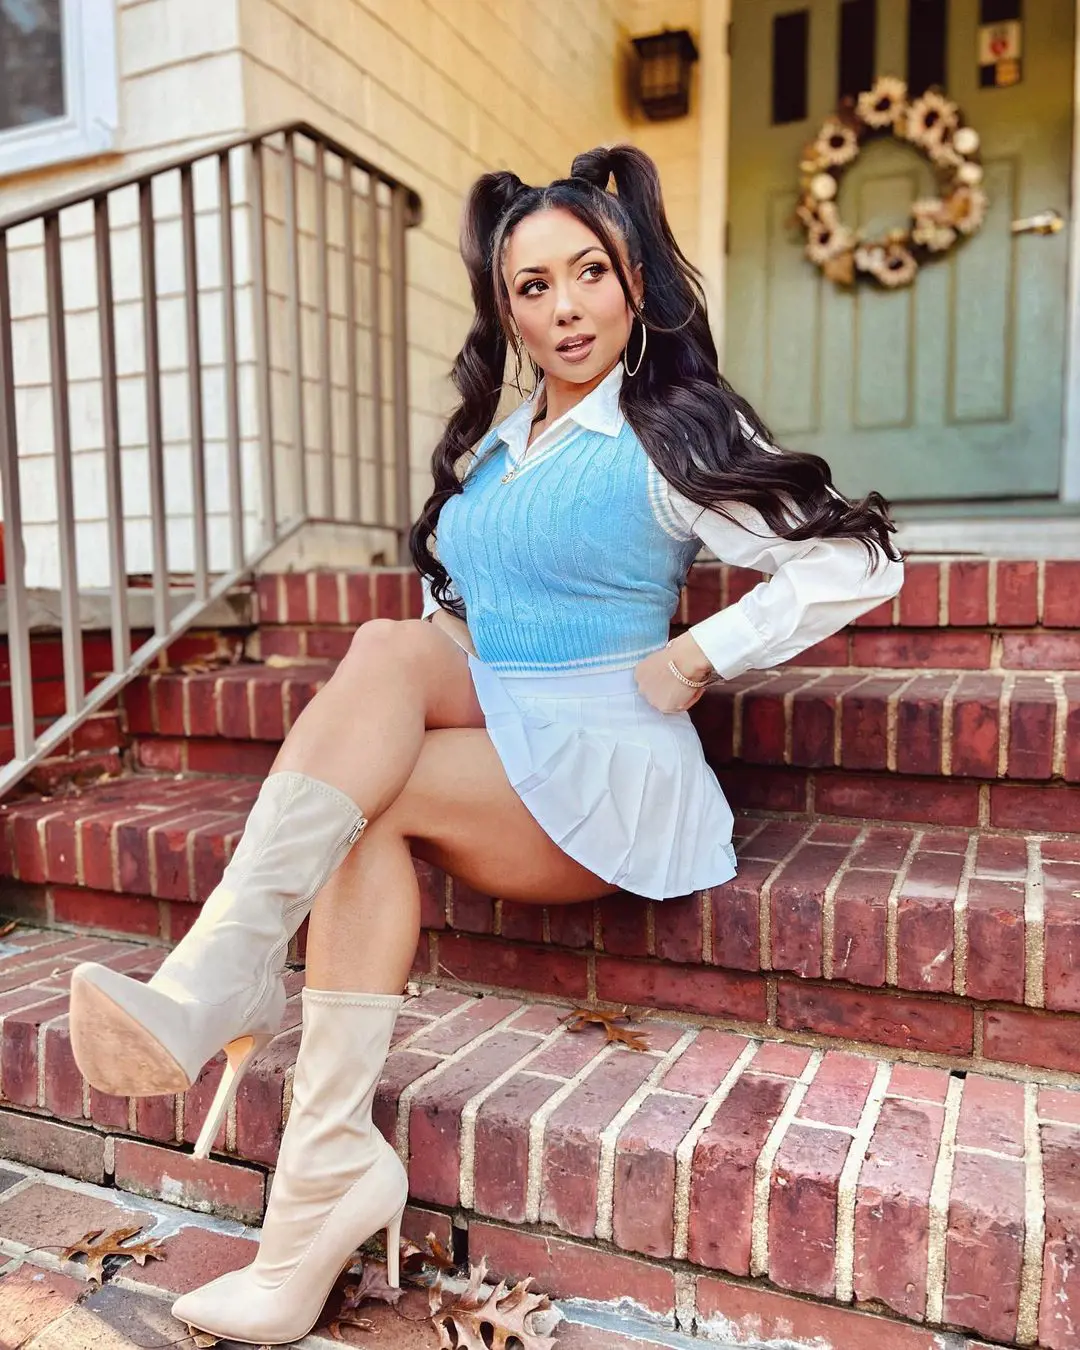 Ashley Nocera wearing blue top and white skirt posing on a staircase in November 2022